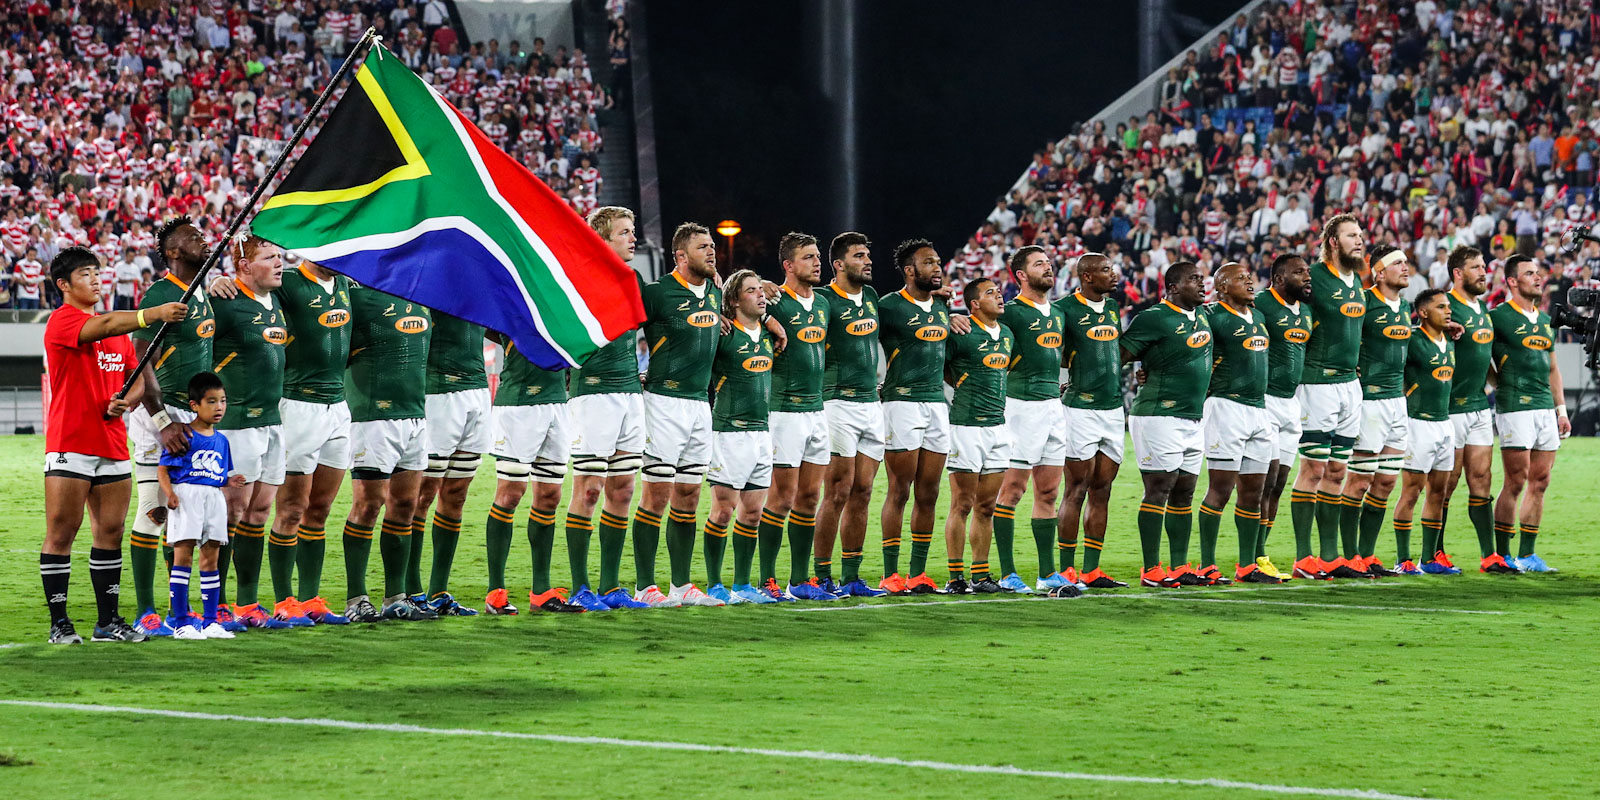 Lining up for the South African anthem